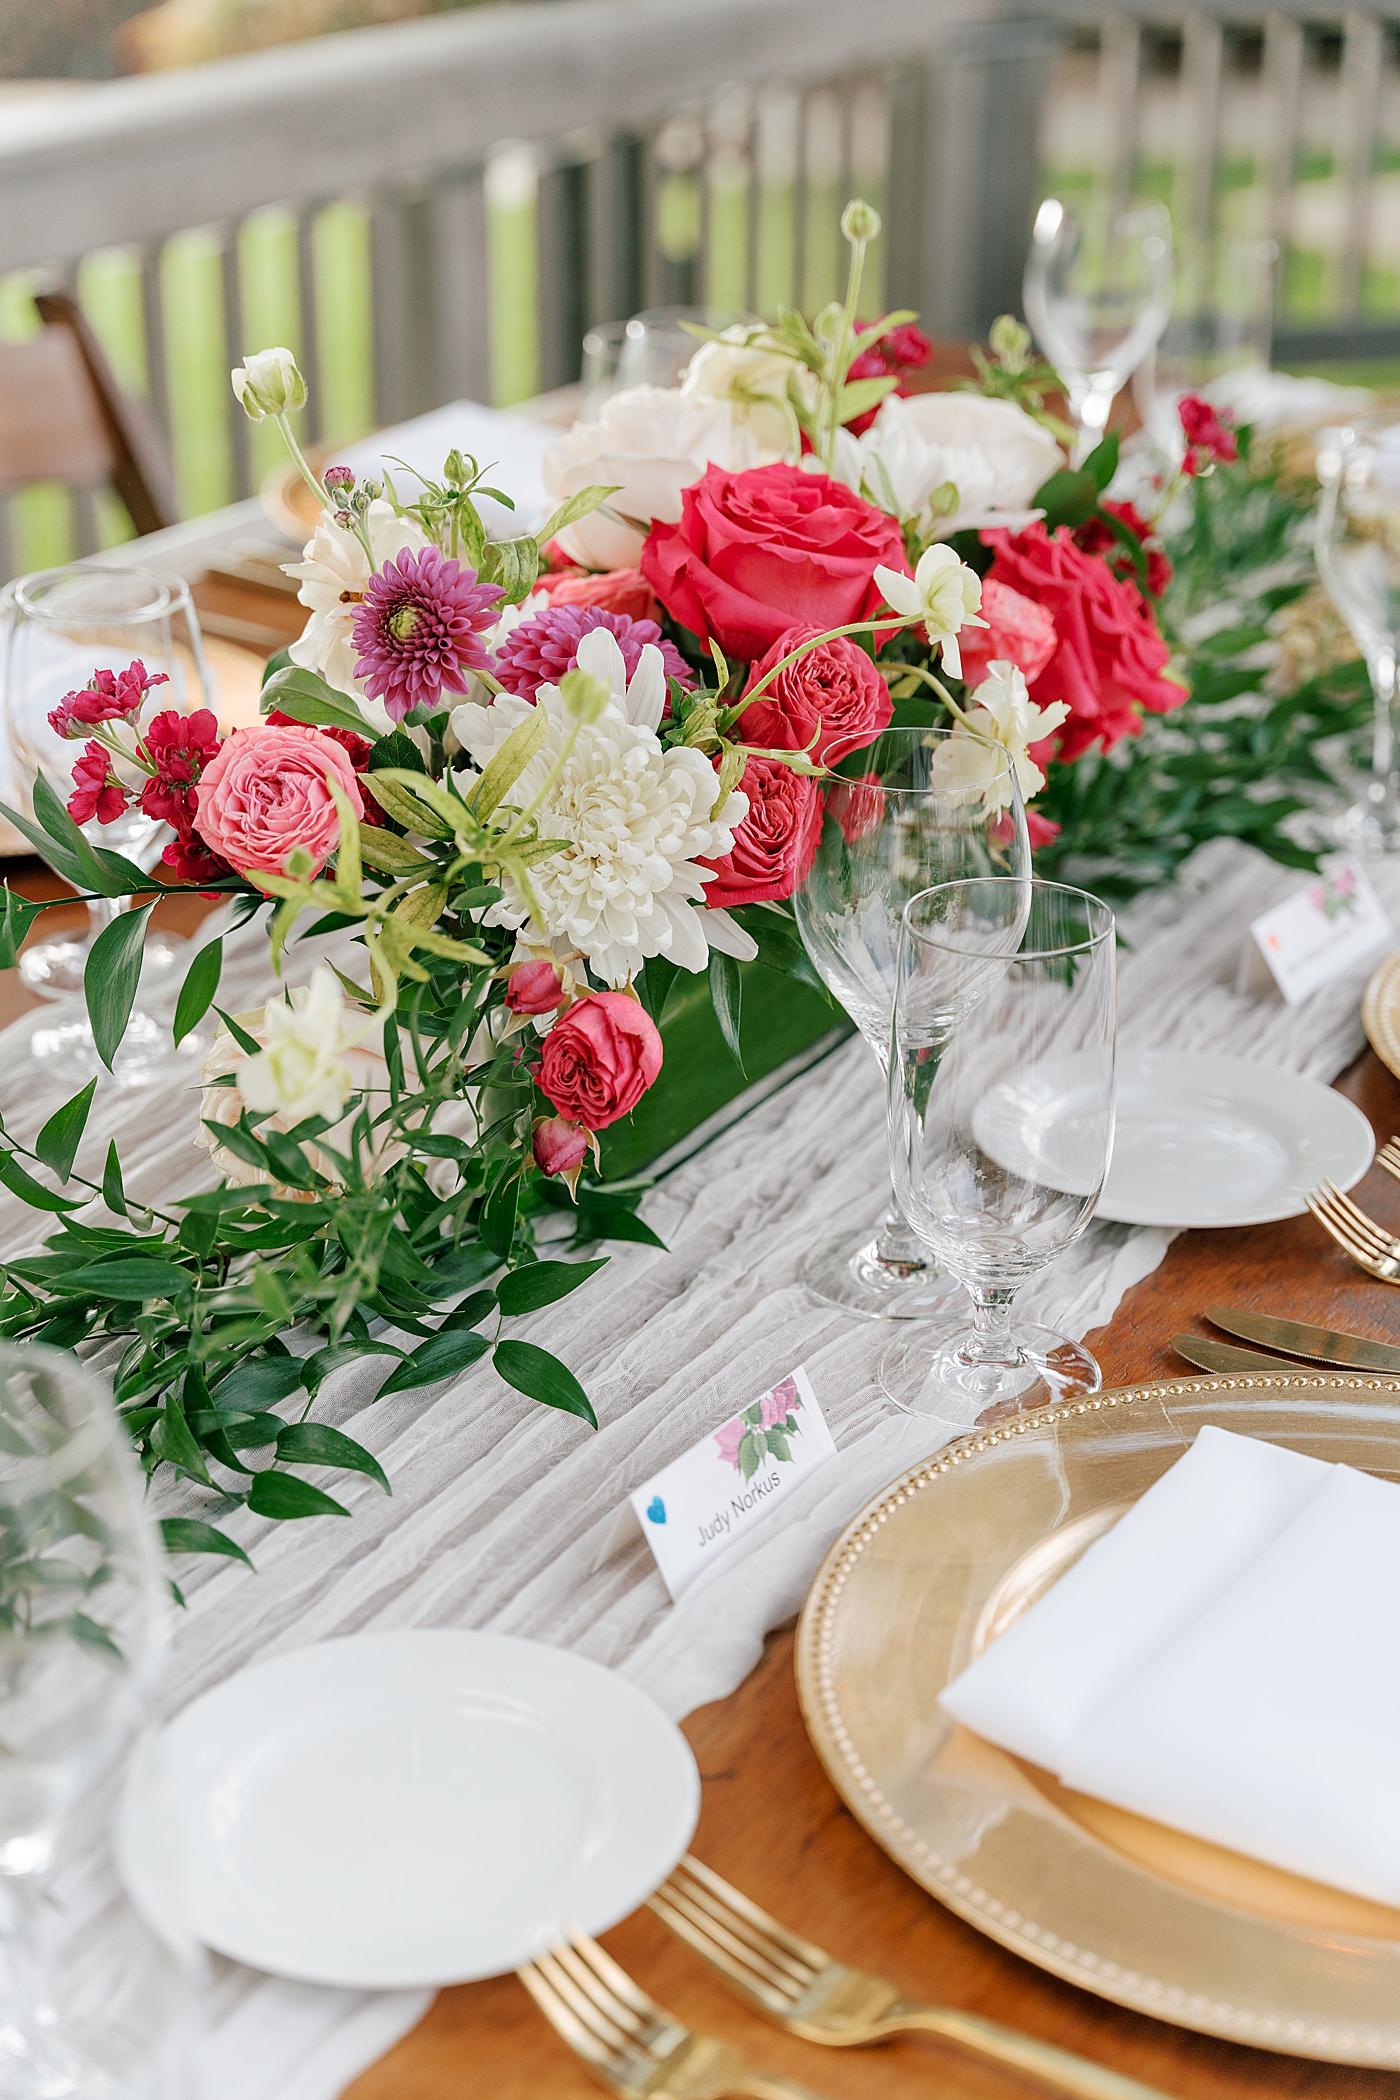 Detail of a wooden wedding dinner table with a white table runner, gold plates, and a colorful flower centerpiece | Image by Hope Helmuth Photography